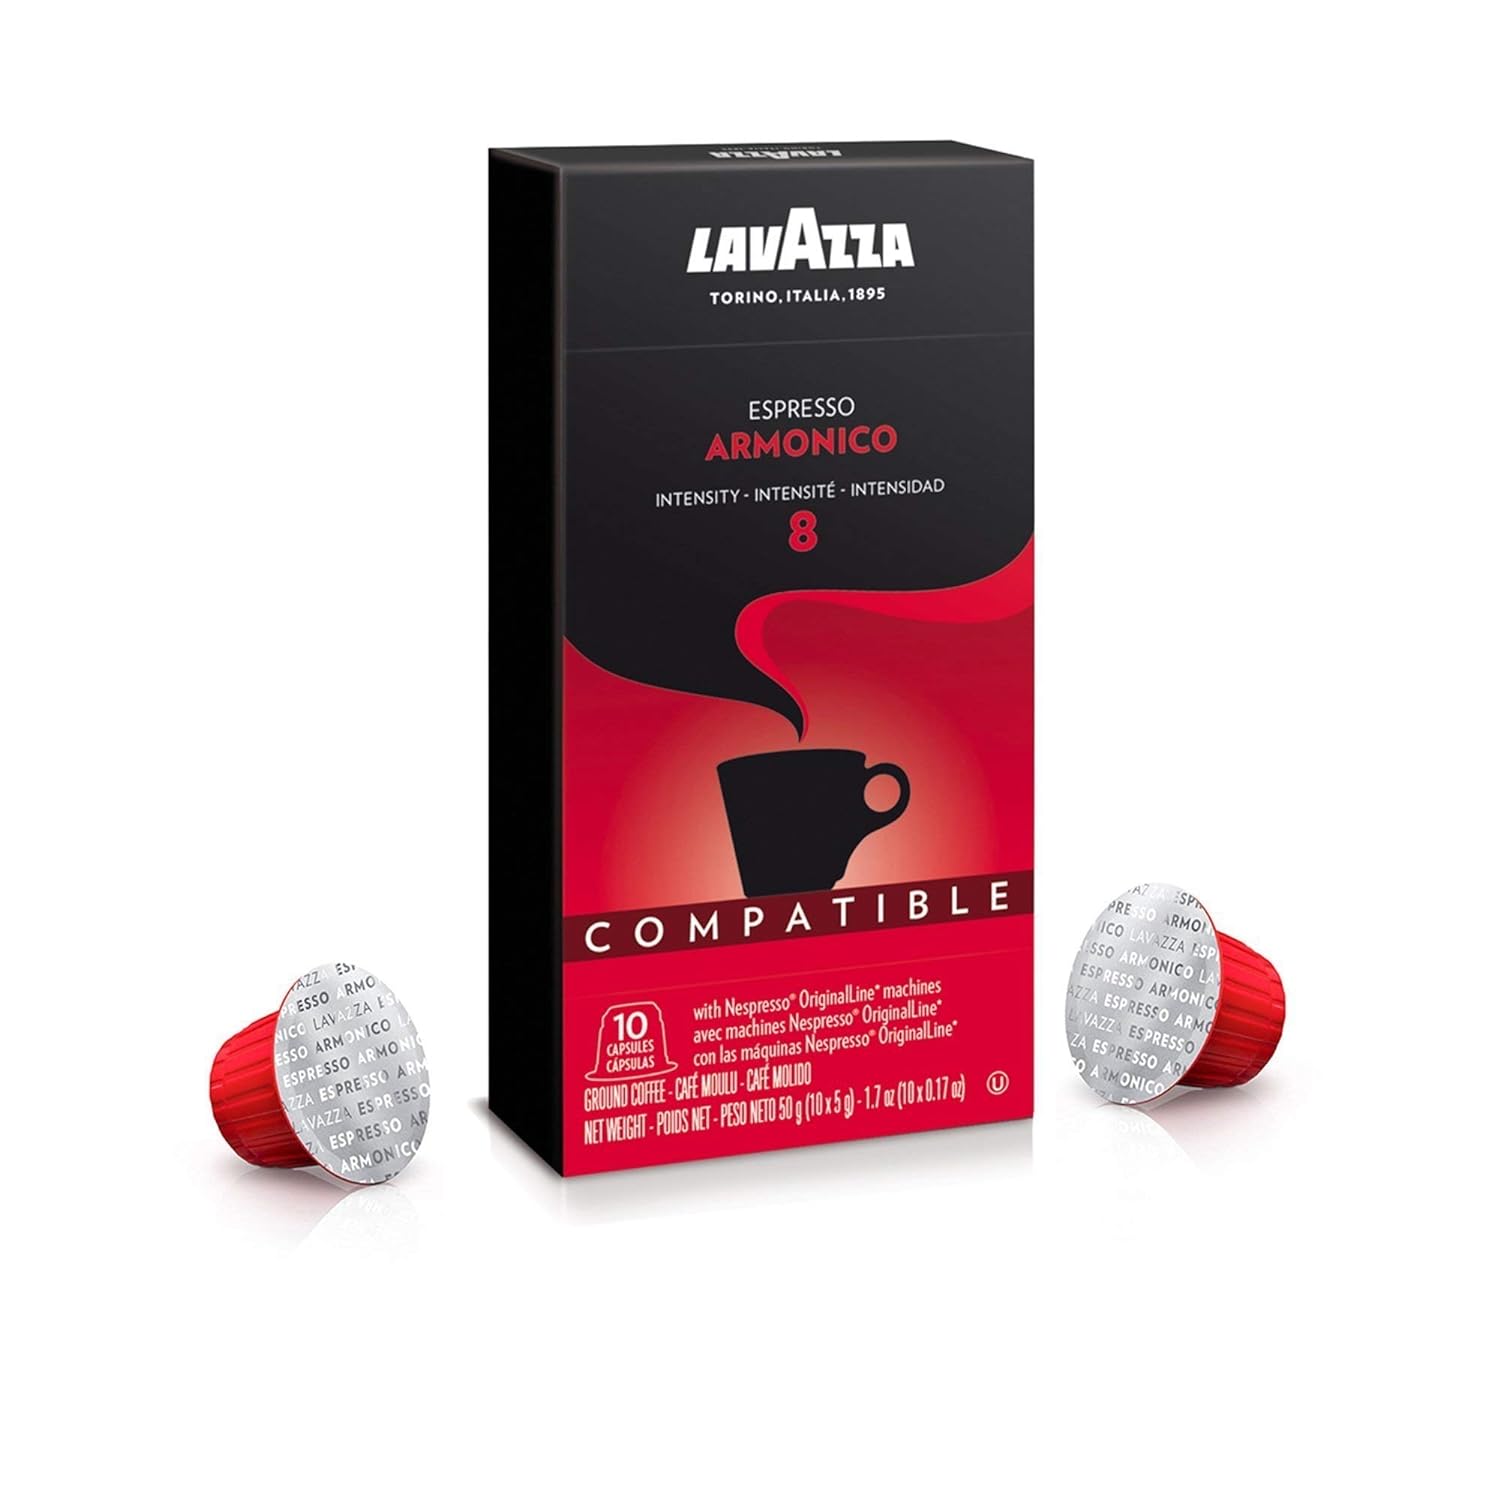 Lavazza Armonico Espresso Dark Roast Coffee Value Pack Capsules Compatible with Nespresso Original Machines, Count of 180 ,Value Pack, Blended and roasted in Italy, Full bodied flavor, Intensity 8